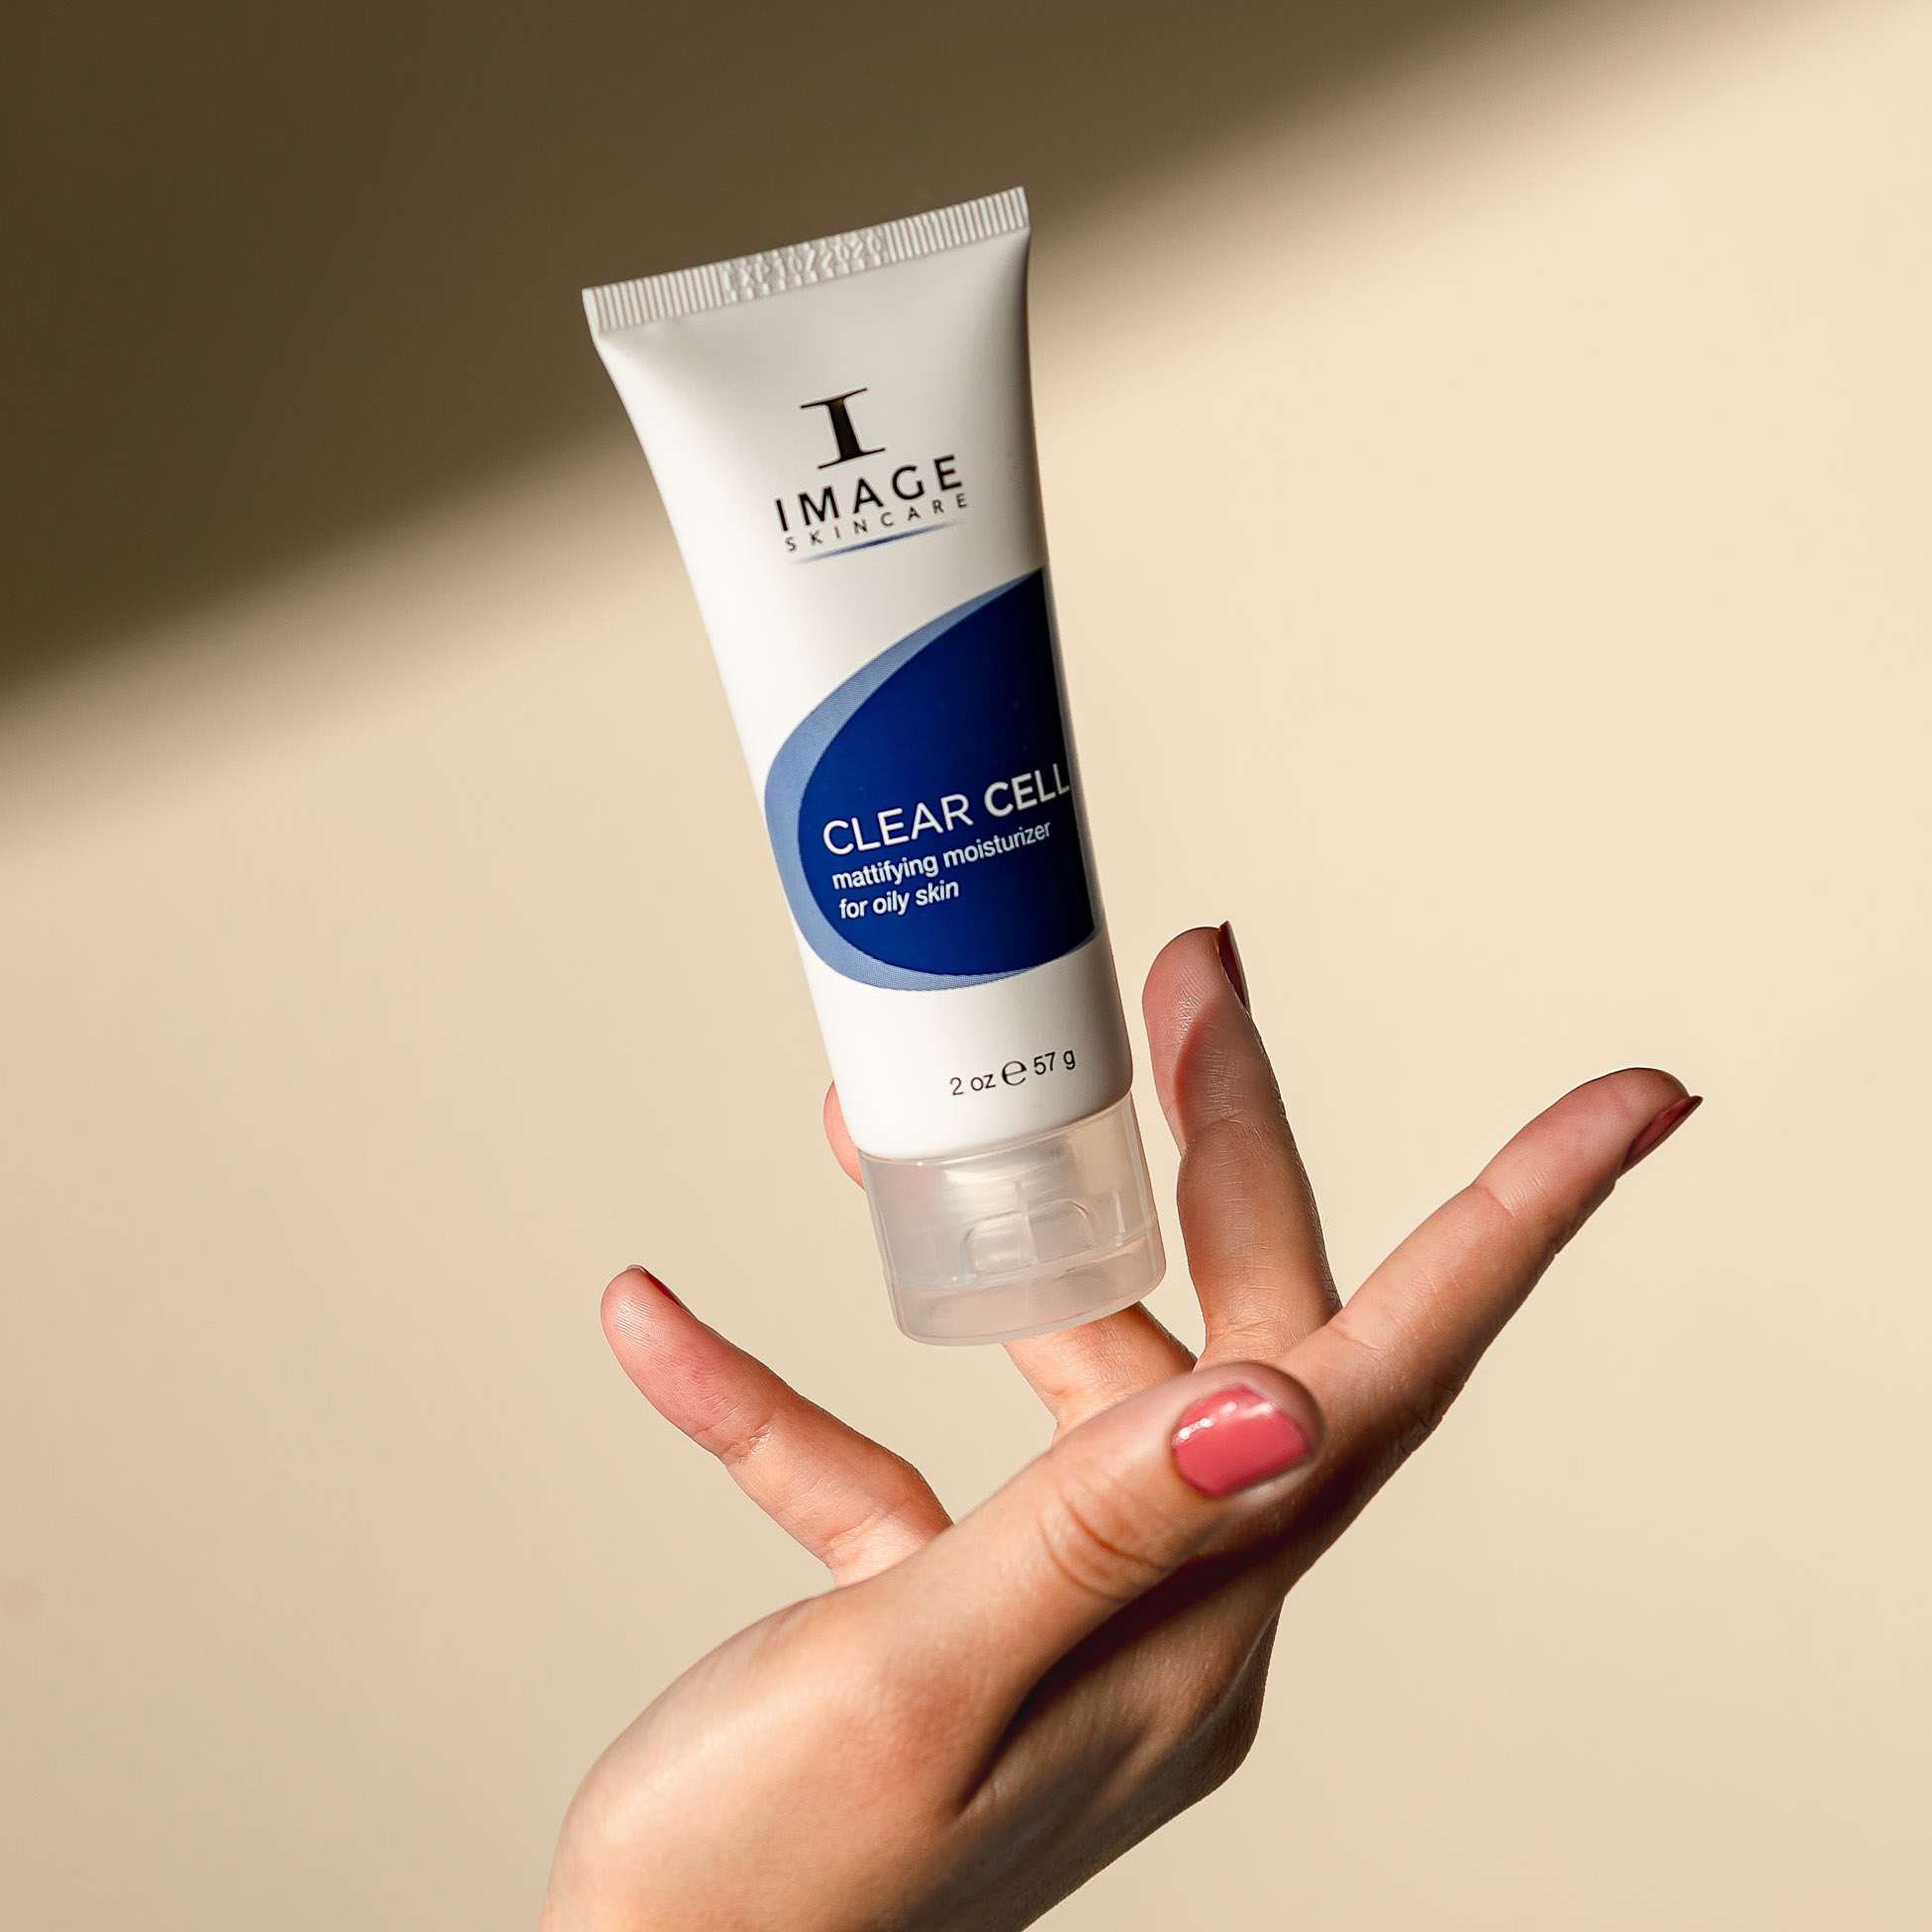 Hand holding squeeze bottle of Image Skincare CLEAR CELL Mattifying Moisturizer for Oily Skin